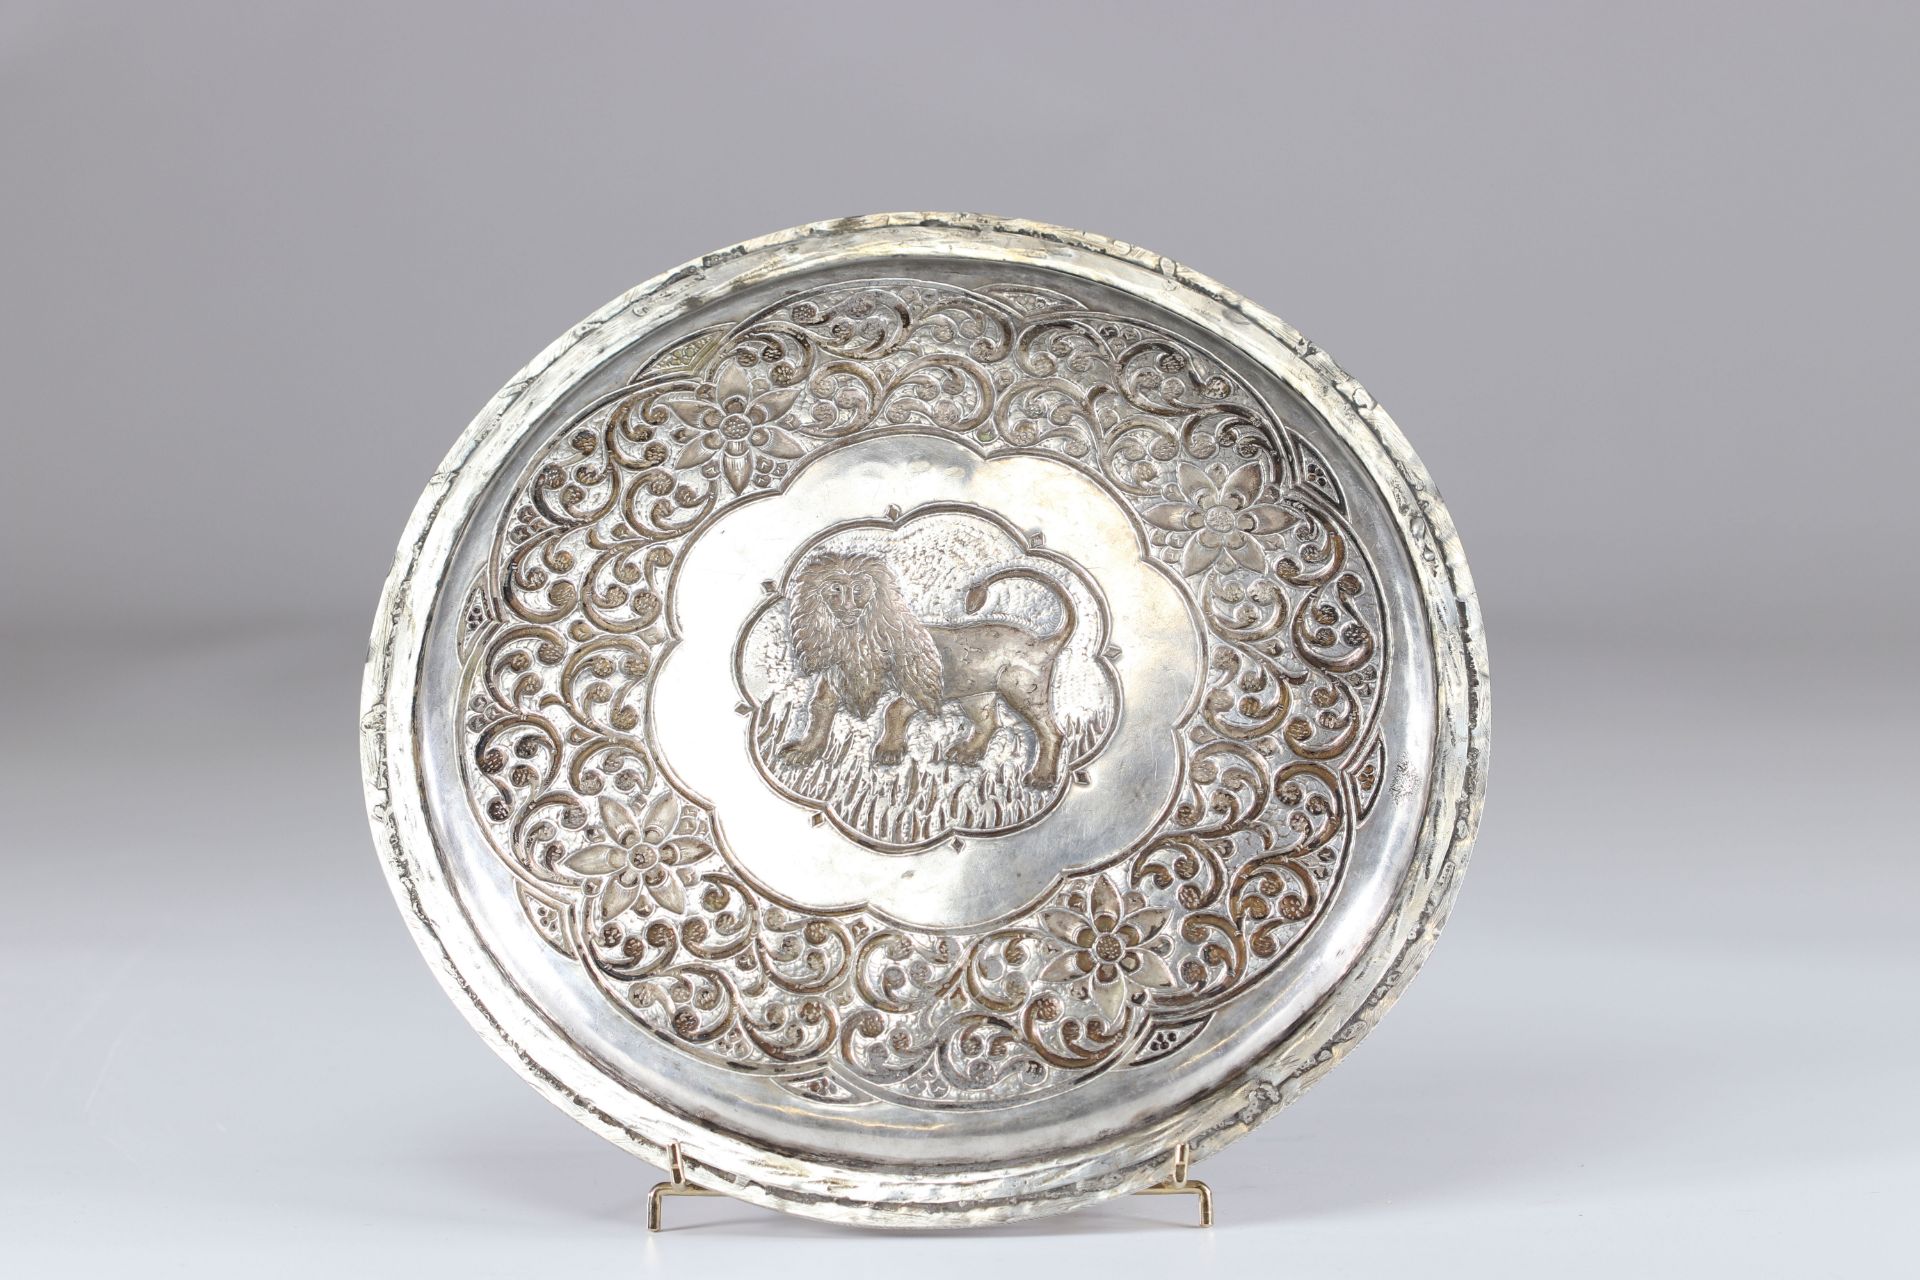 Silver dish in the center a lion probably India - Image 3 of 3